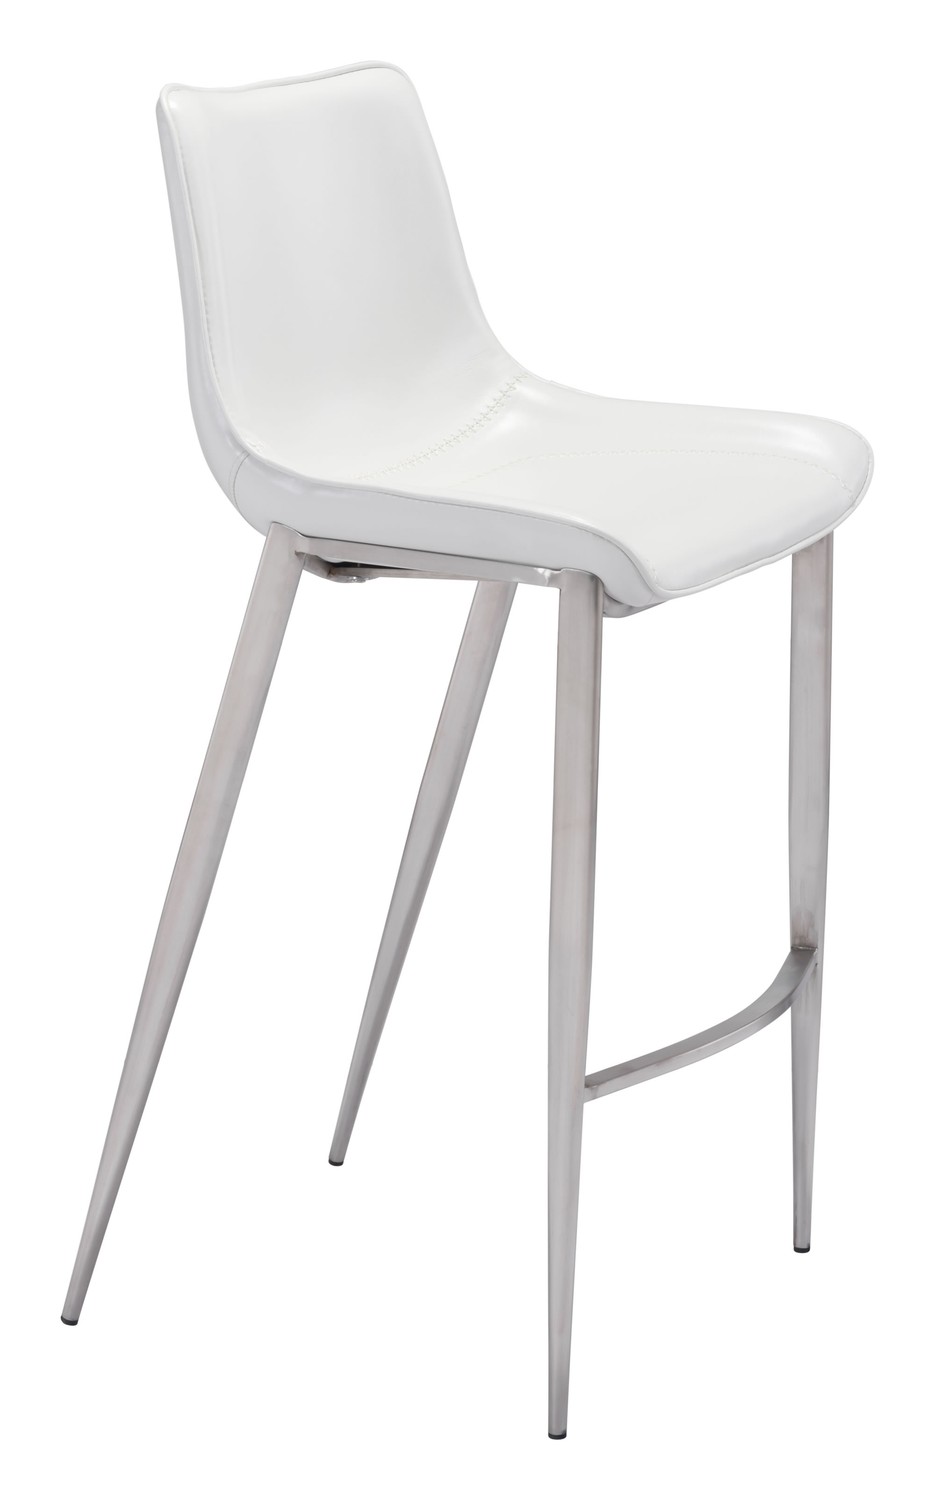 20.7" x 21.7" x 43.3" White, Leatherette, Brushed Stainless Steel, Bar Chair - Set of 2